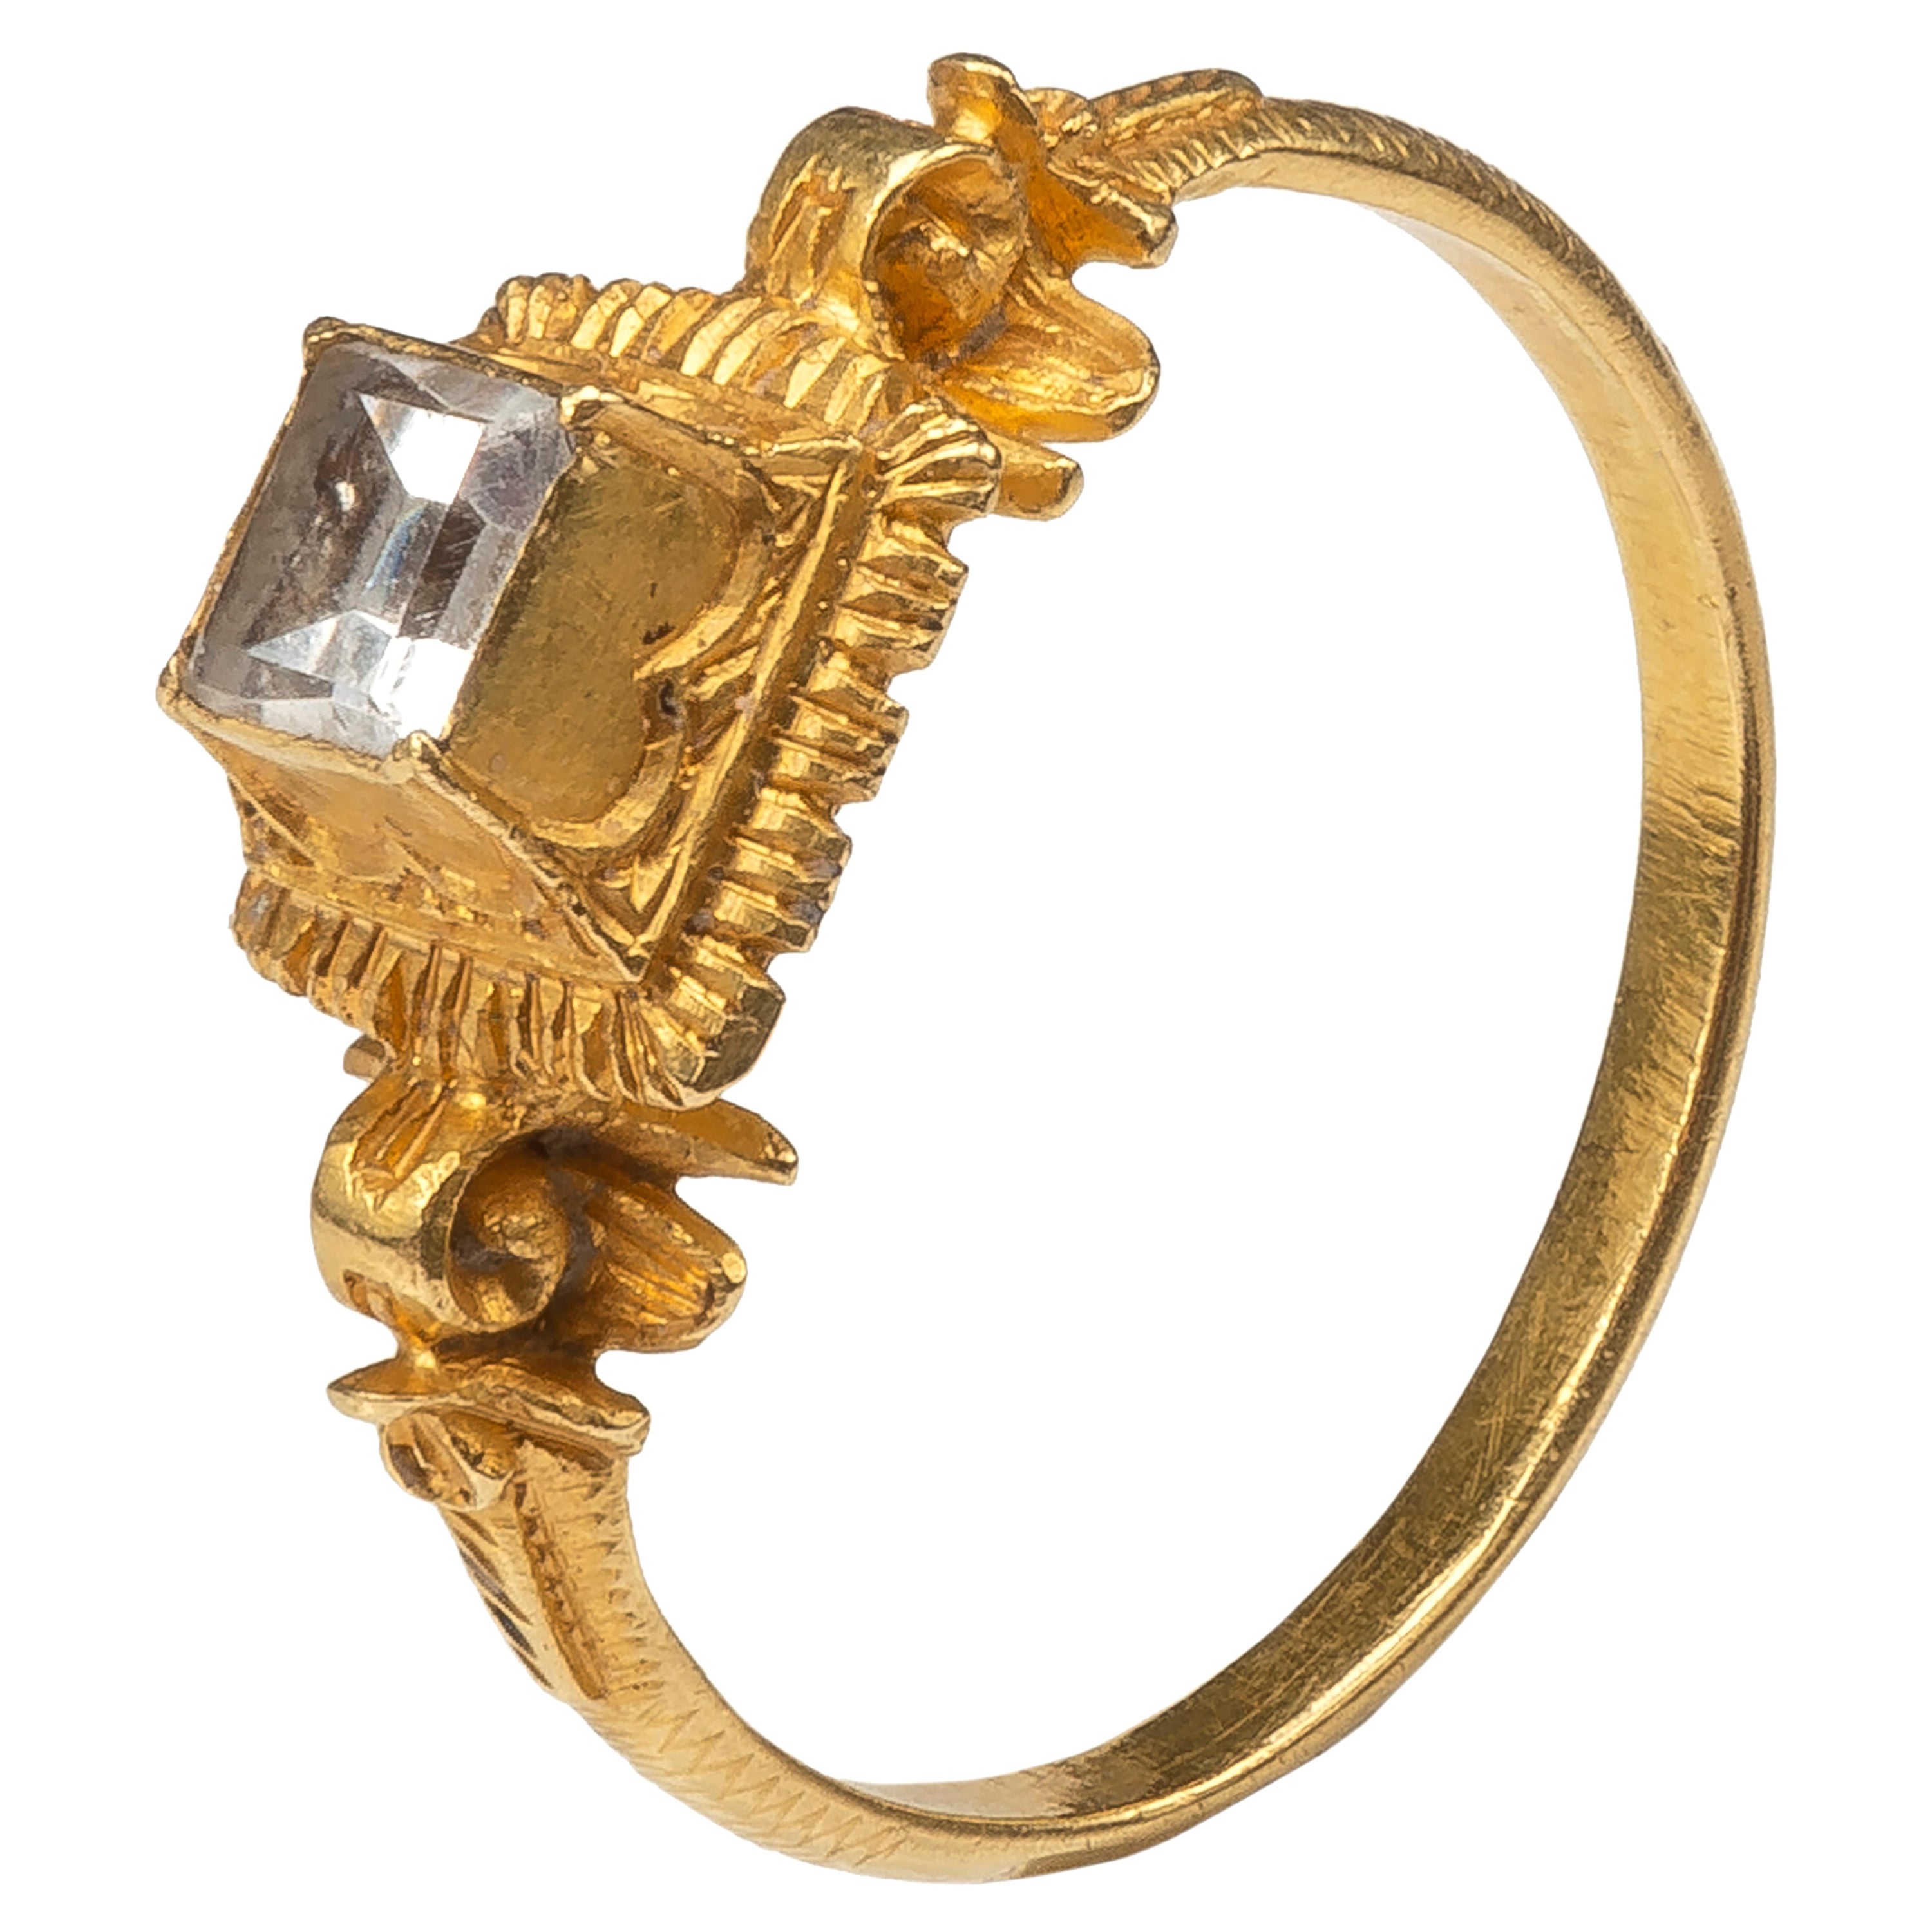 Renaissance Gold Marriage Ring with Table-Cut Rock Crystal For Sale